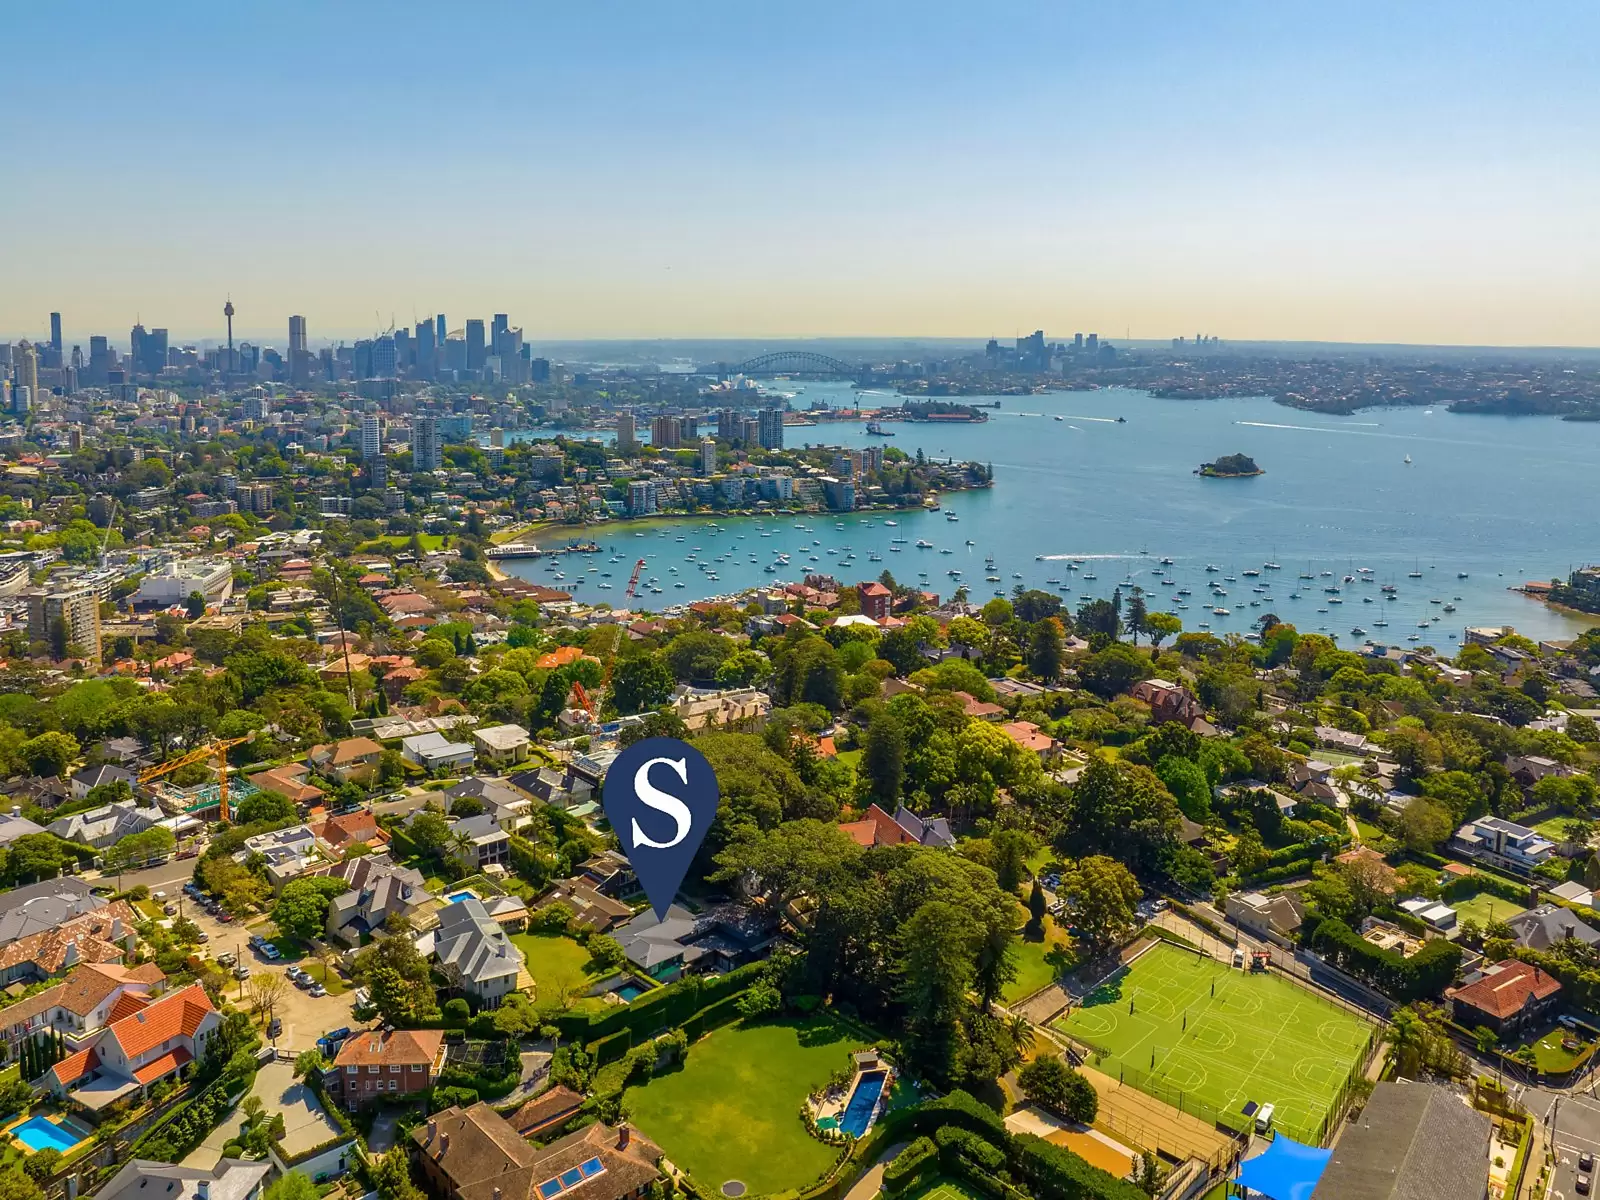 Photo #25: 15B Ginahgulla Road, Bellevue Hill - For Sale by Sydney Sotheby's International Realty